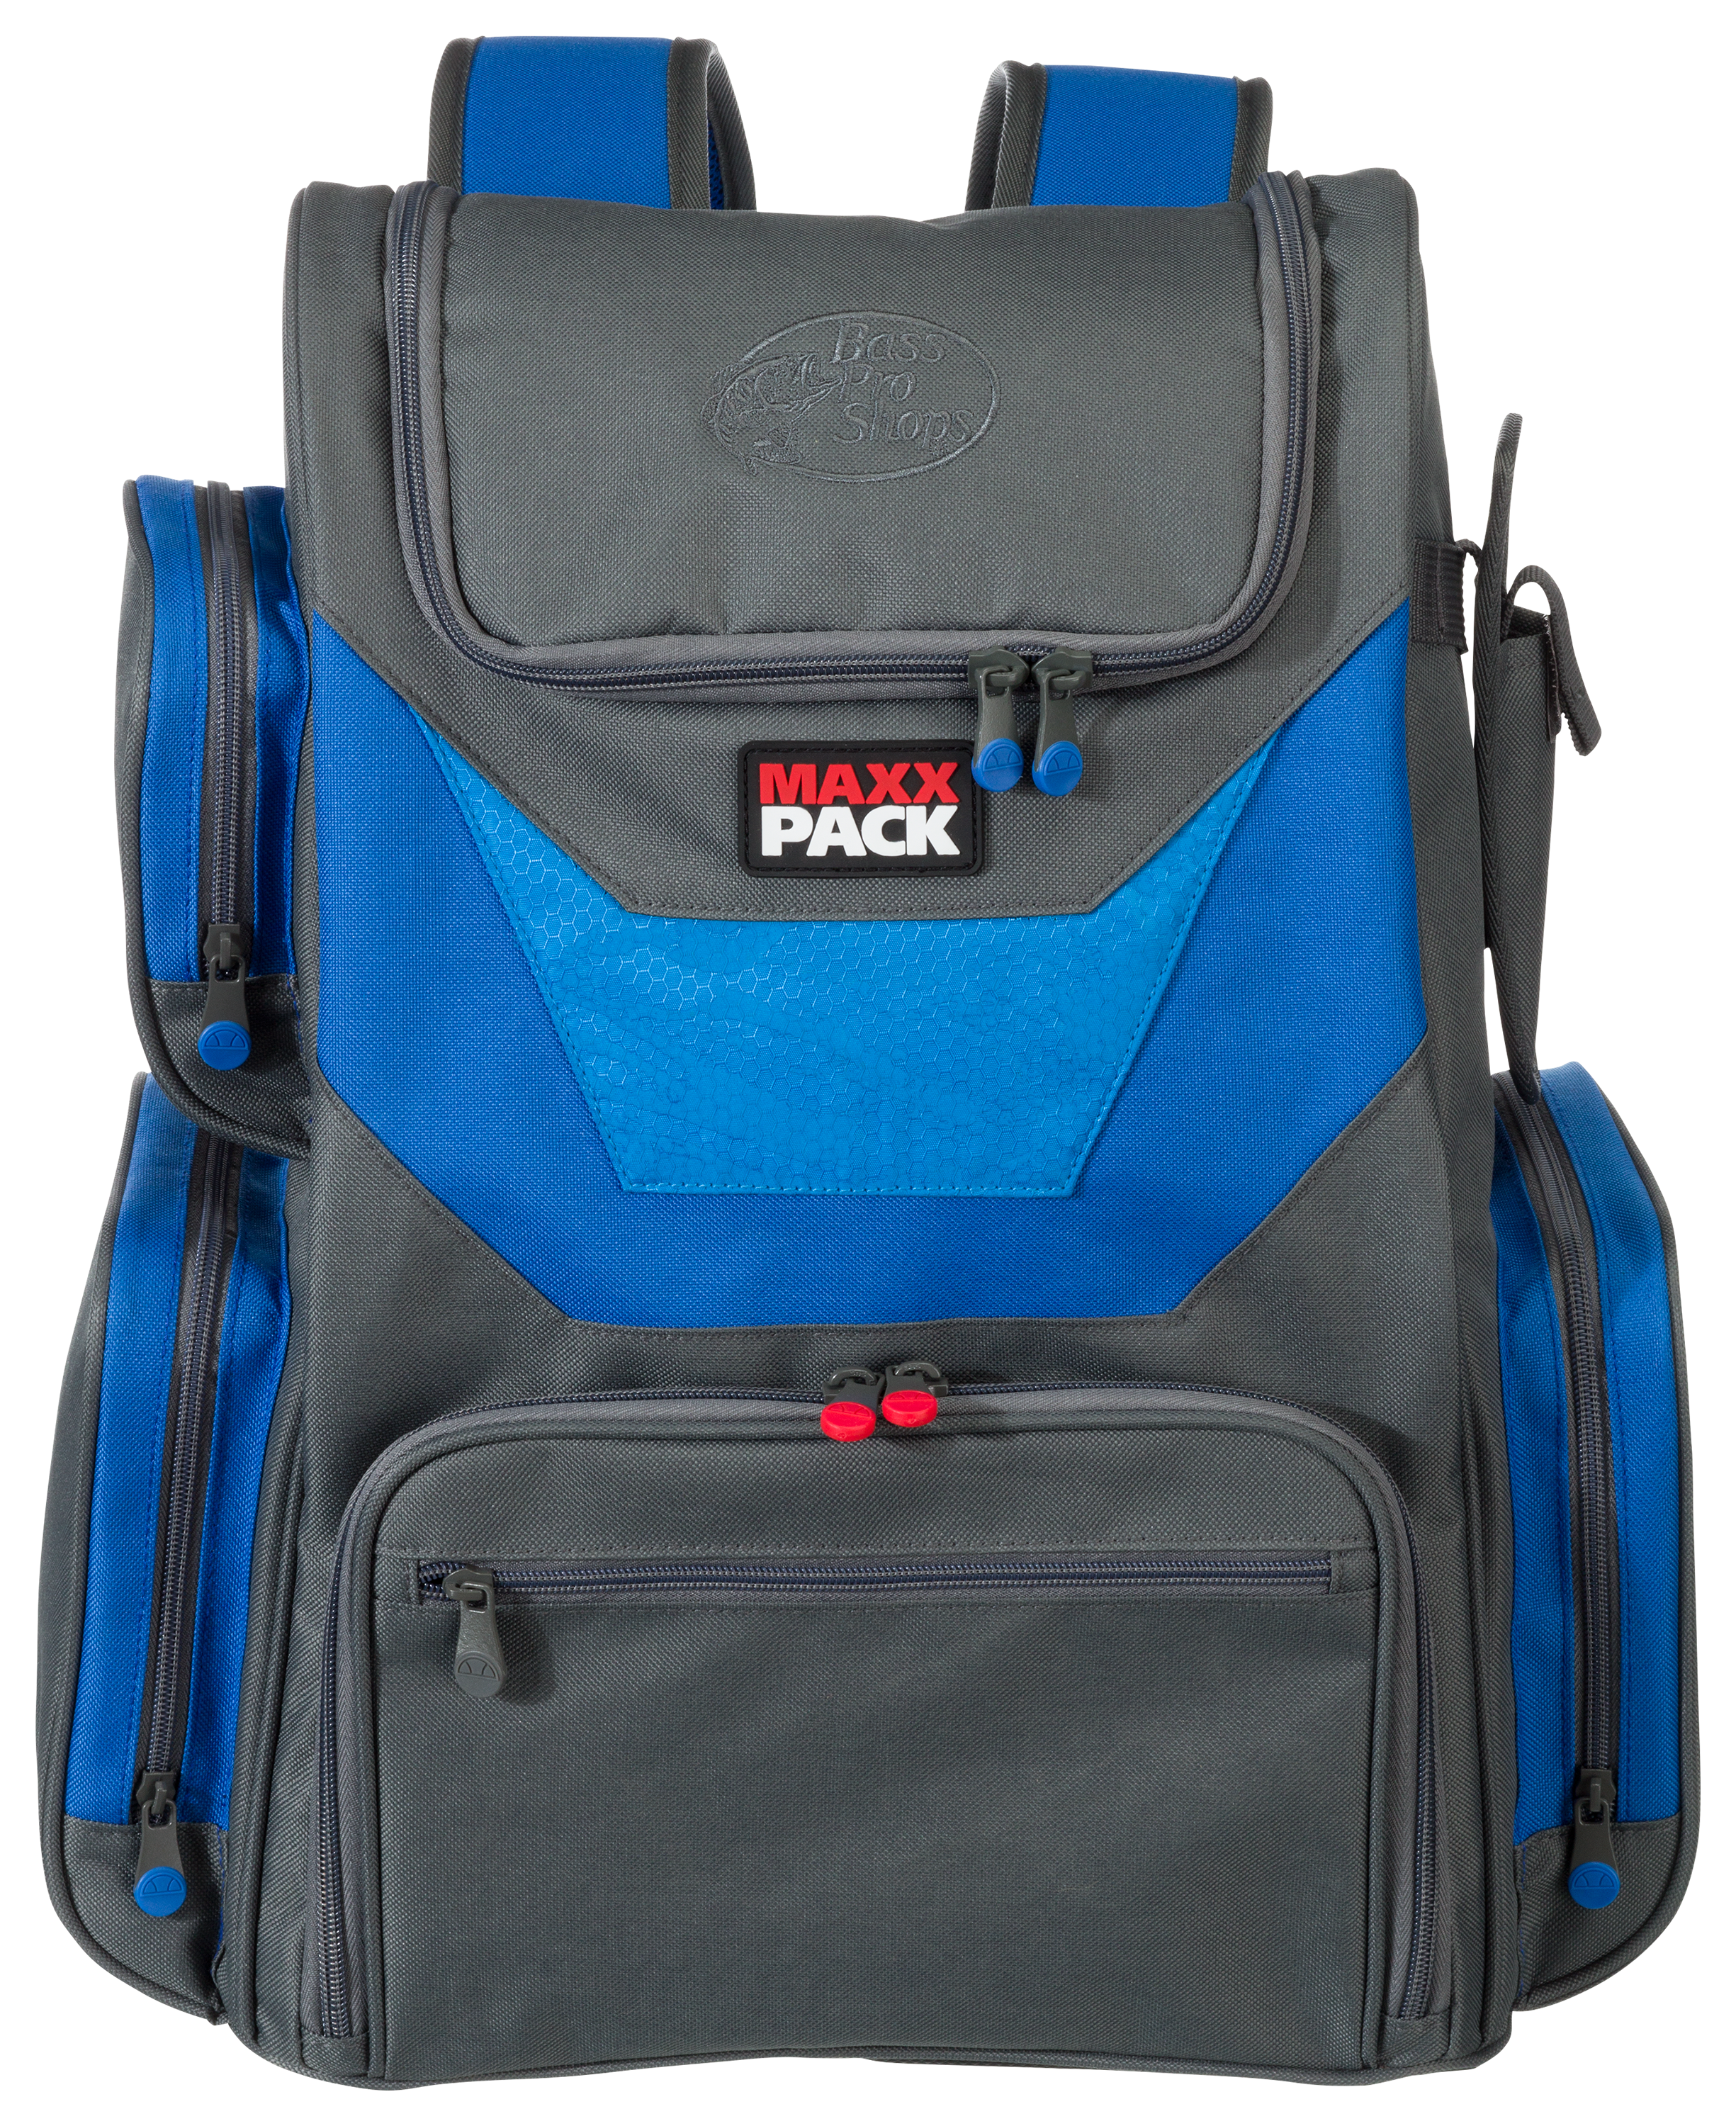 Bass Pro Shop Maxx Pack Fishing Backpack W/ Utility Trays (New)